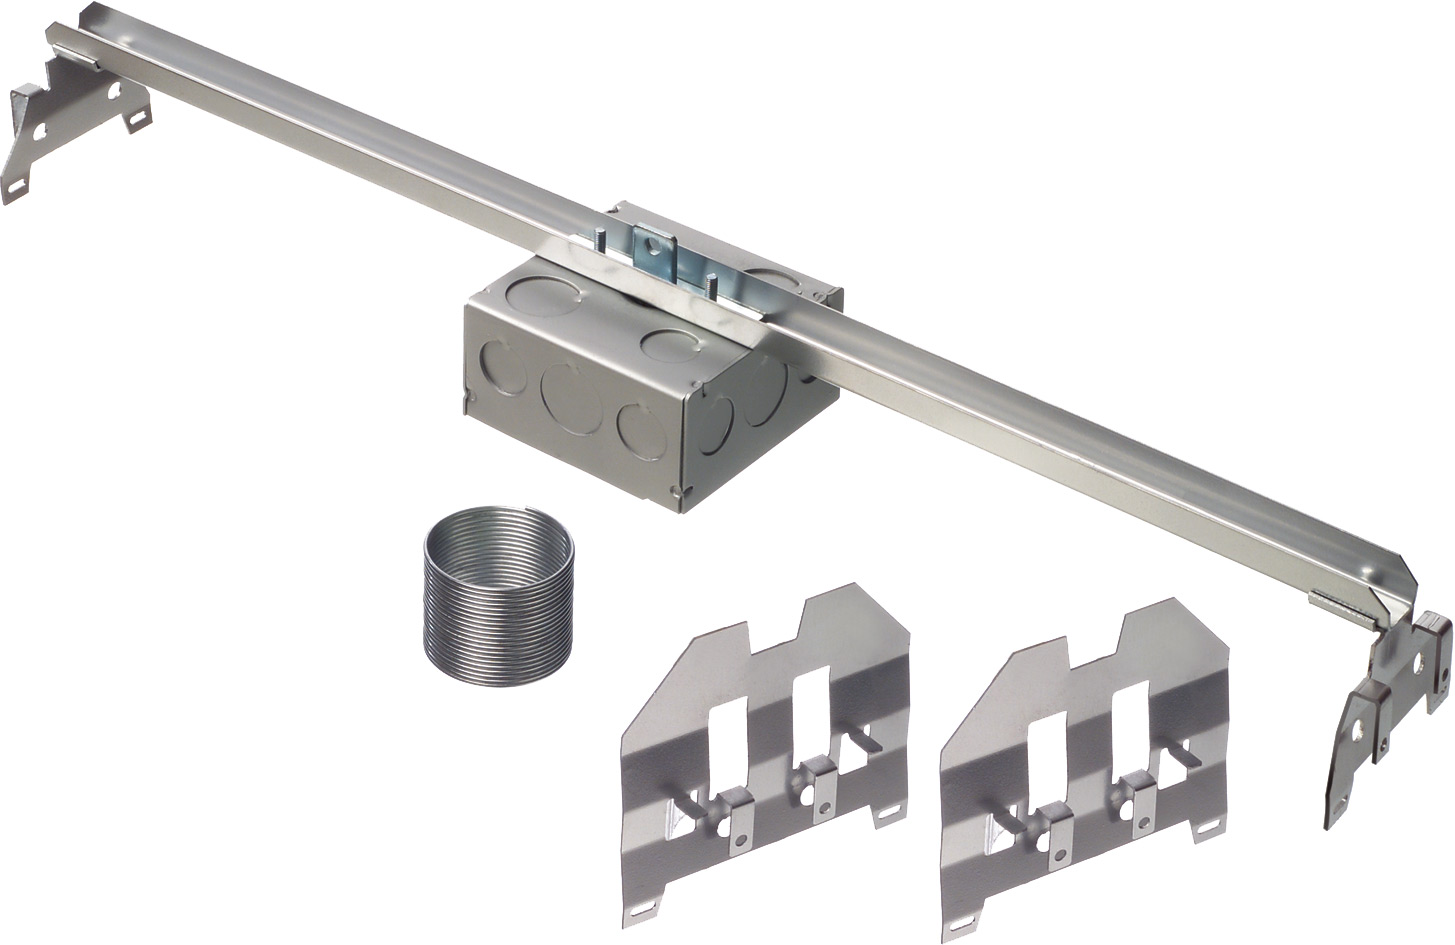 Steel fixtured box kit for suspended ceilings. With adjustable mounting bar. Preset for 24 in. Grid. Supports up to 50lb fixtures. 1-1/2 inch box depth, 30 cu. in. 4 in. square box.